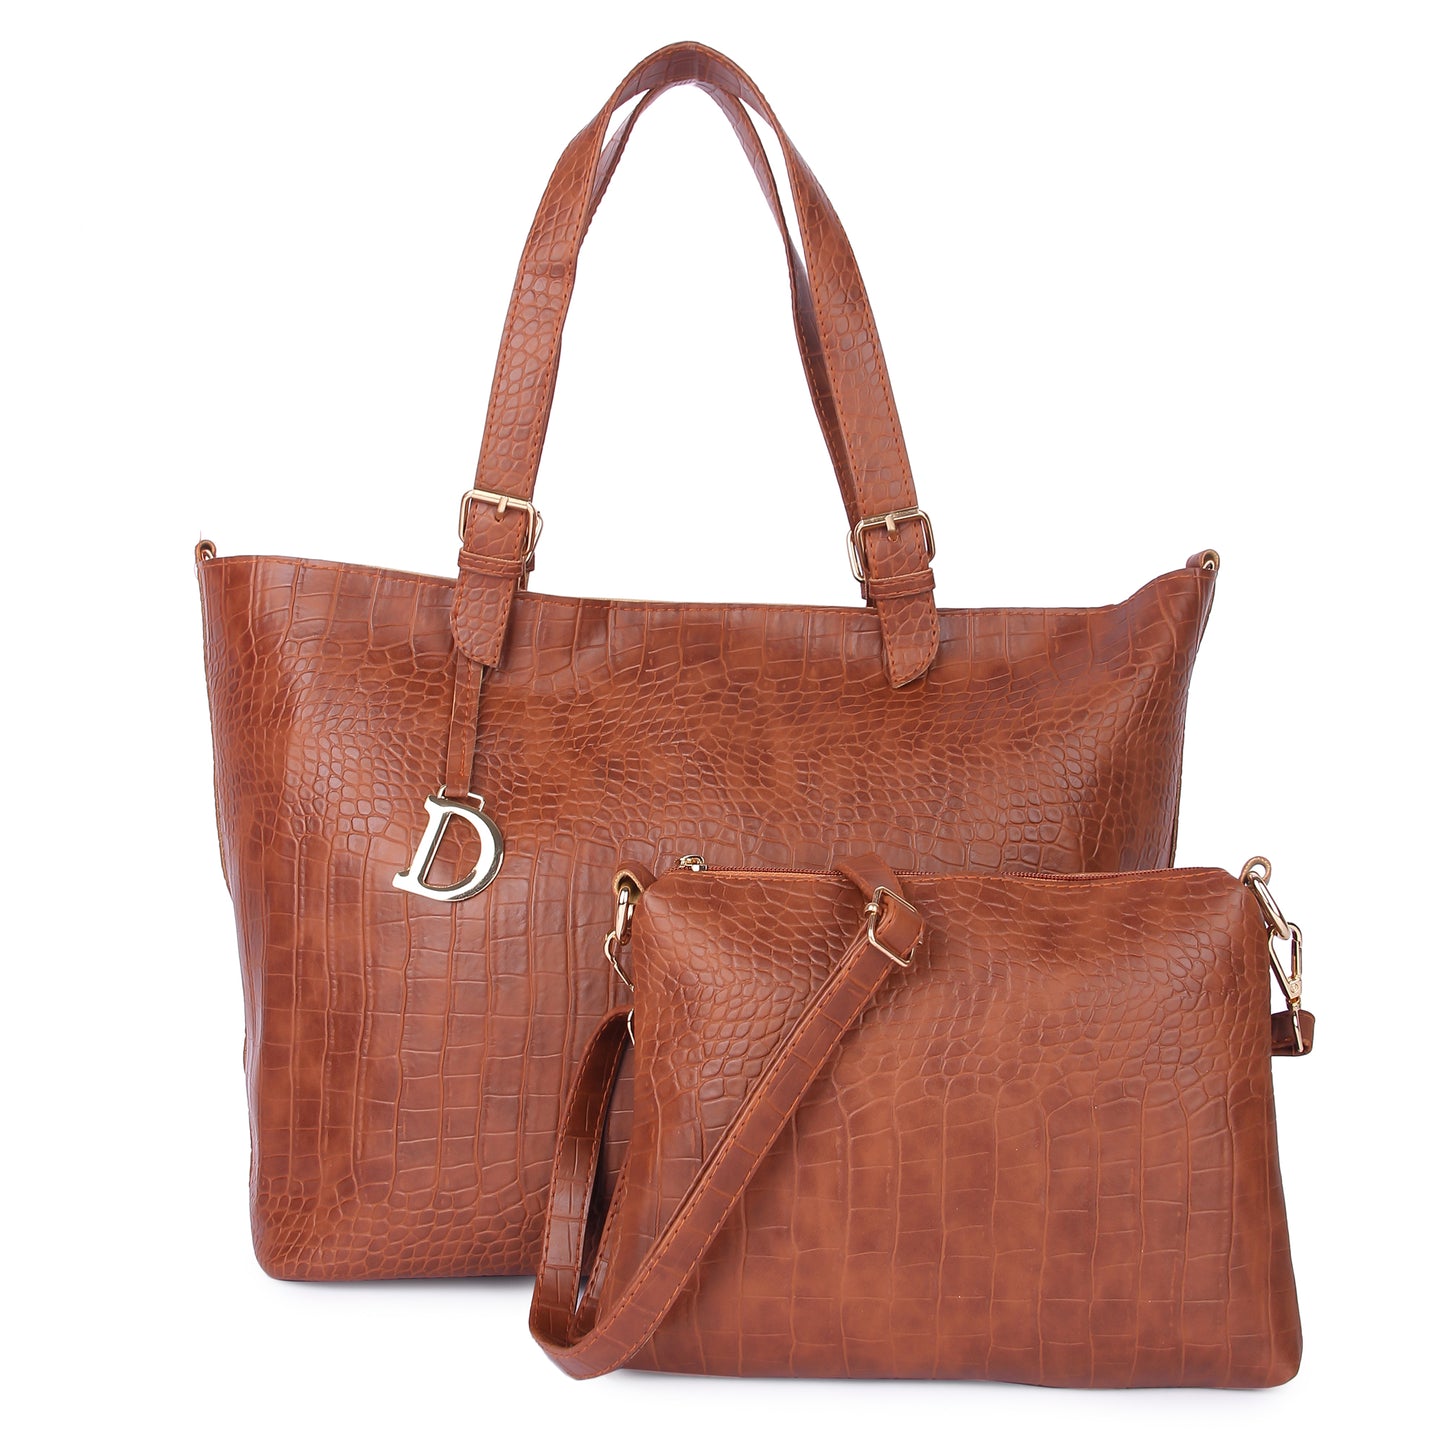 Tote Bags For Girls In PU Leather